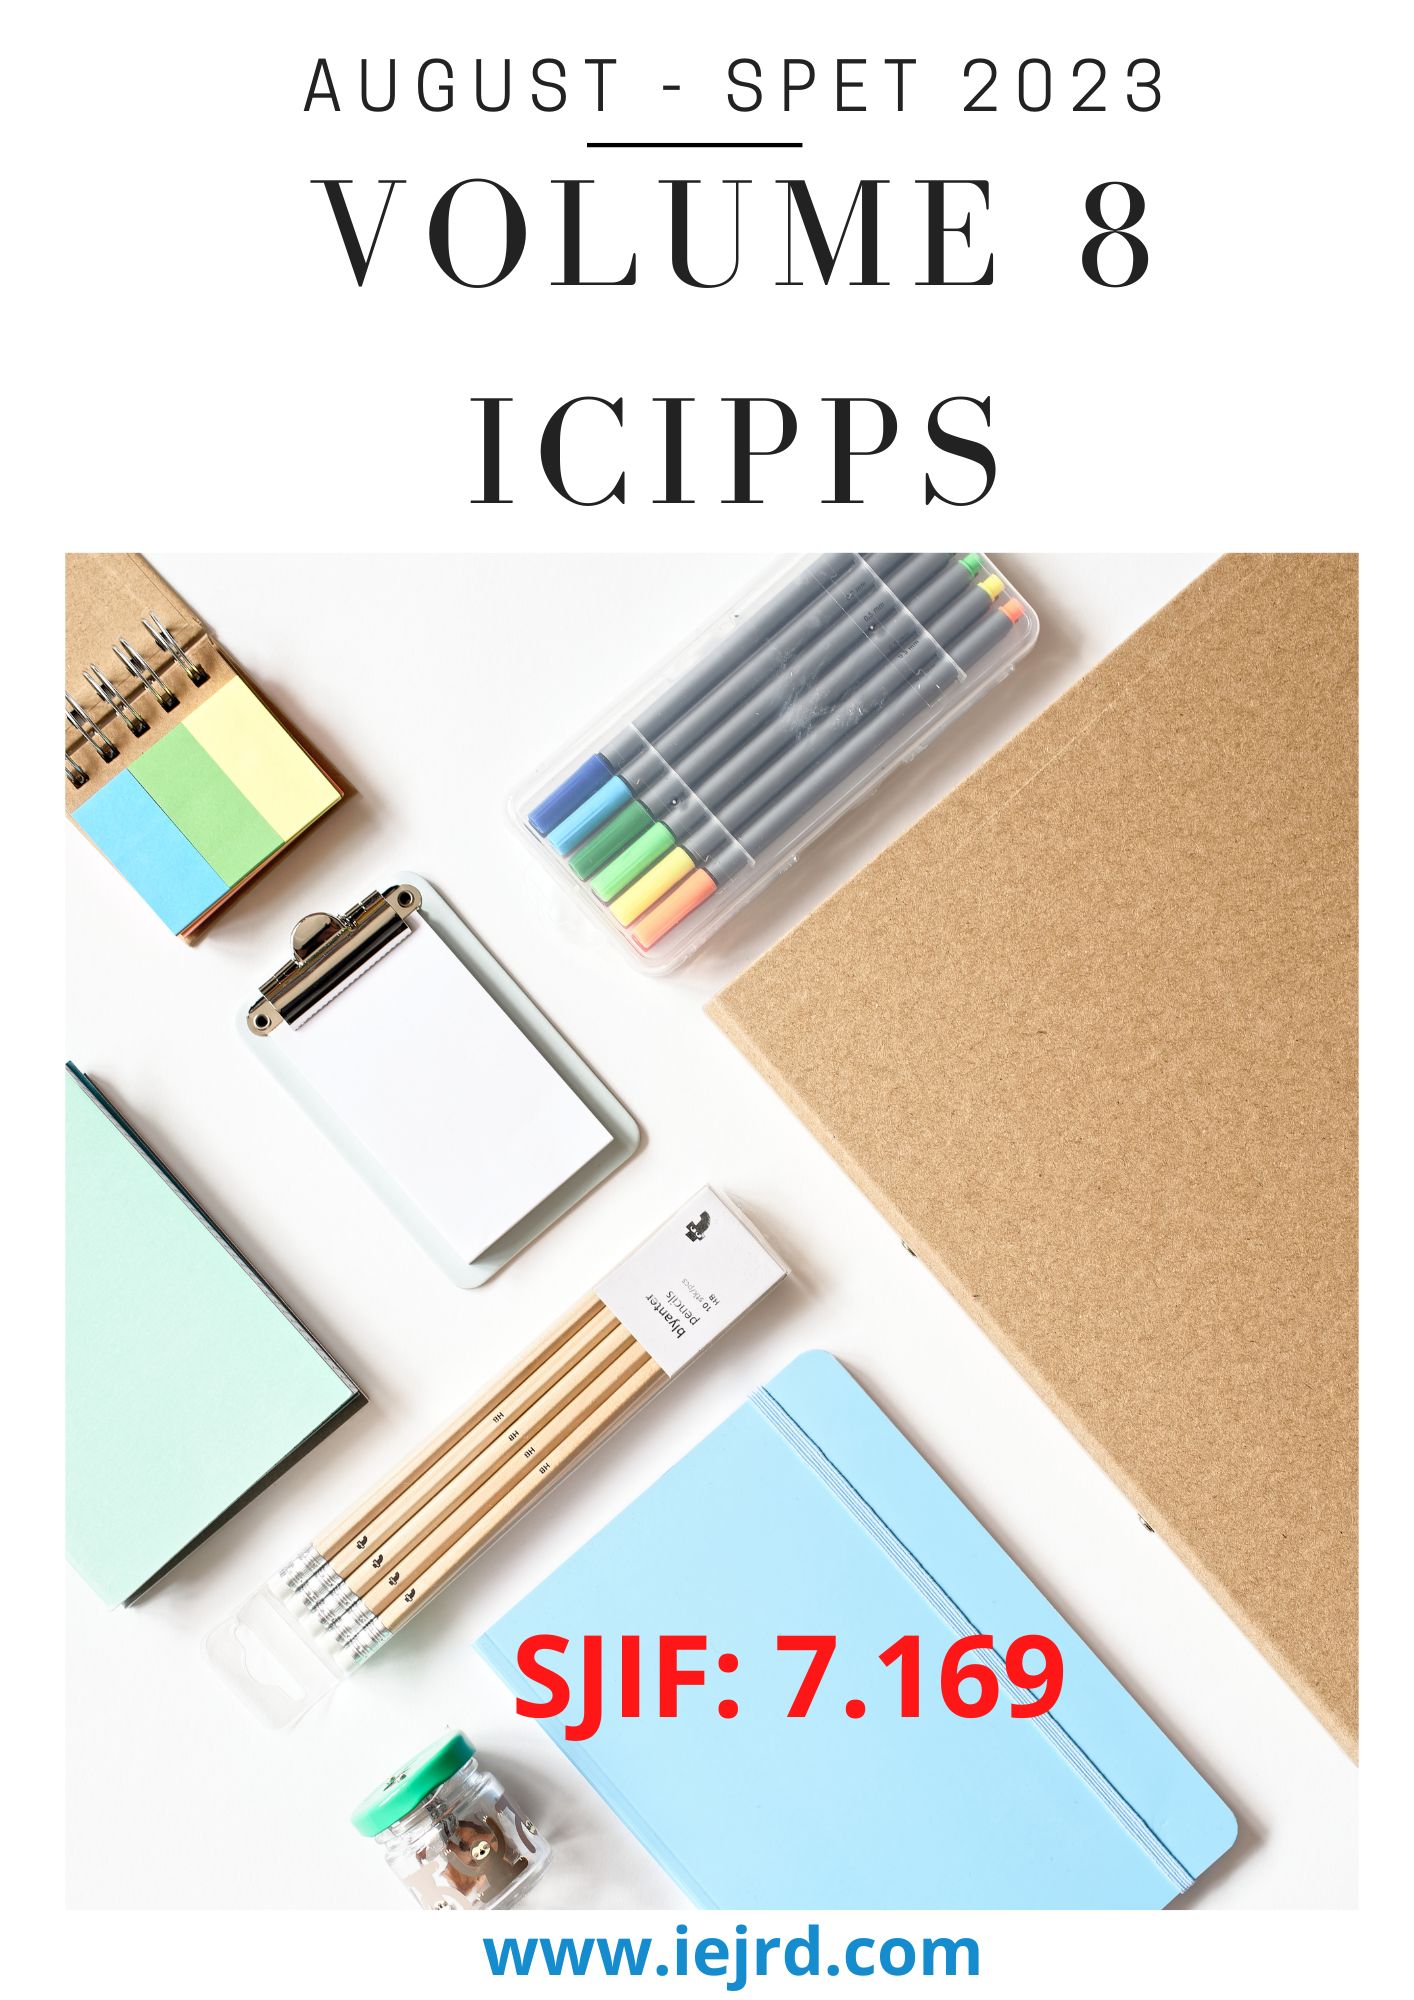 					View Vol. 8 No. ICIPPS (2023): ICIPPS 2023
				